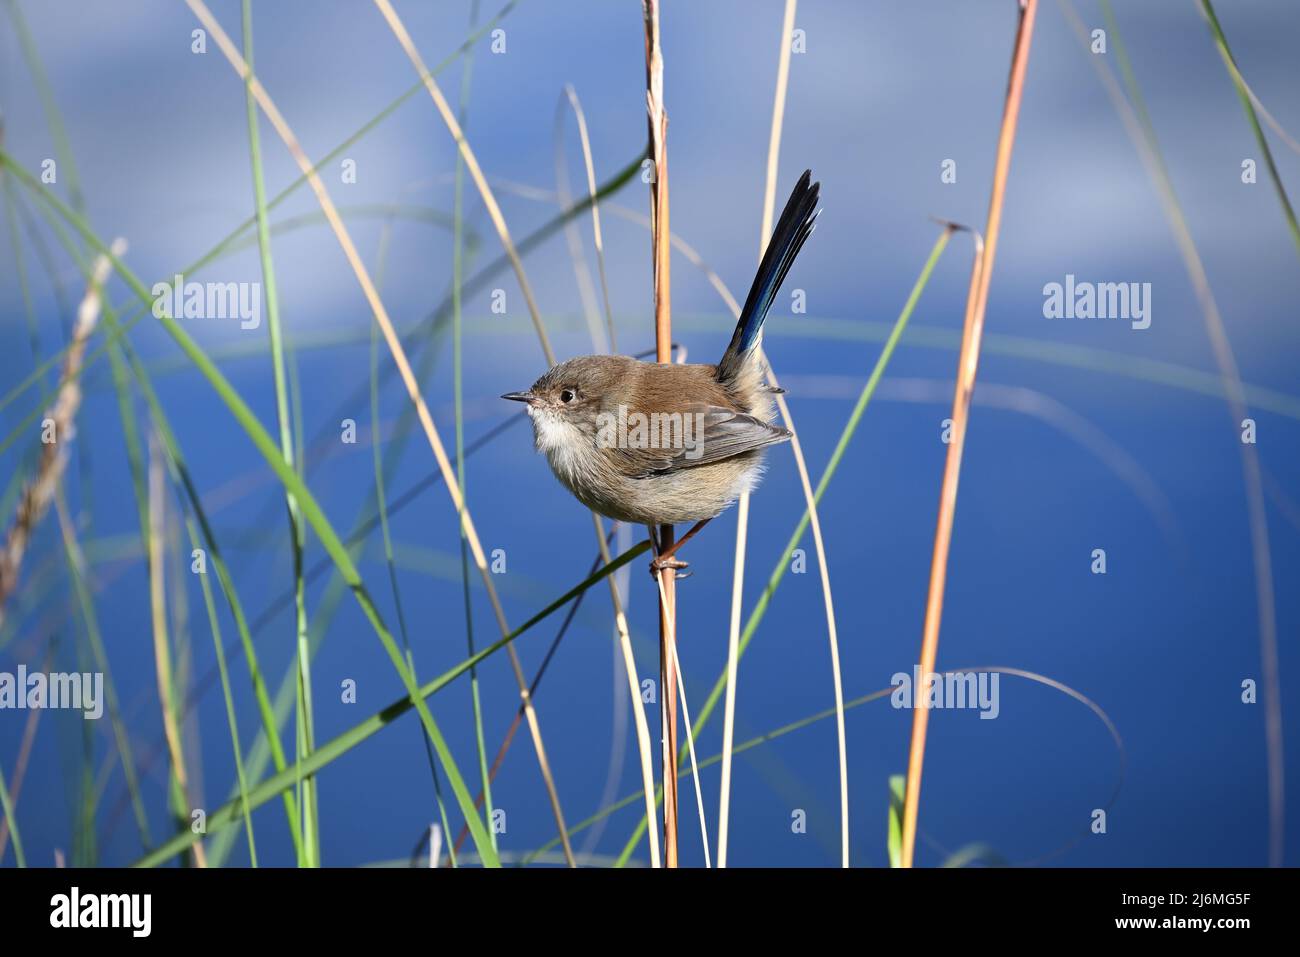 Male superb fairy-wren, with dull brown plumage and blue tail pointed skyward, perched on a thin reed near a lake during autumn Stock Photo